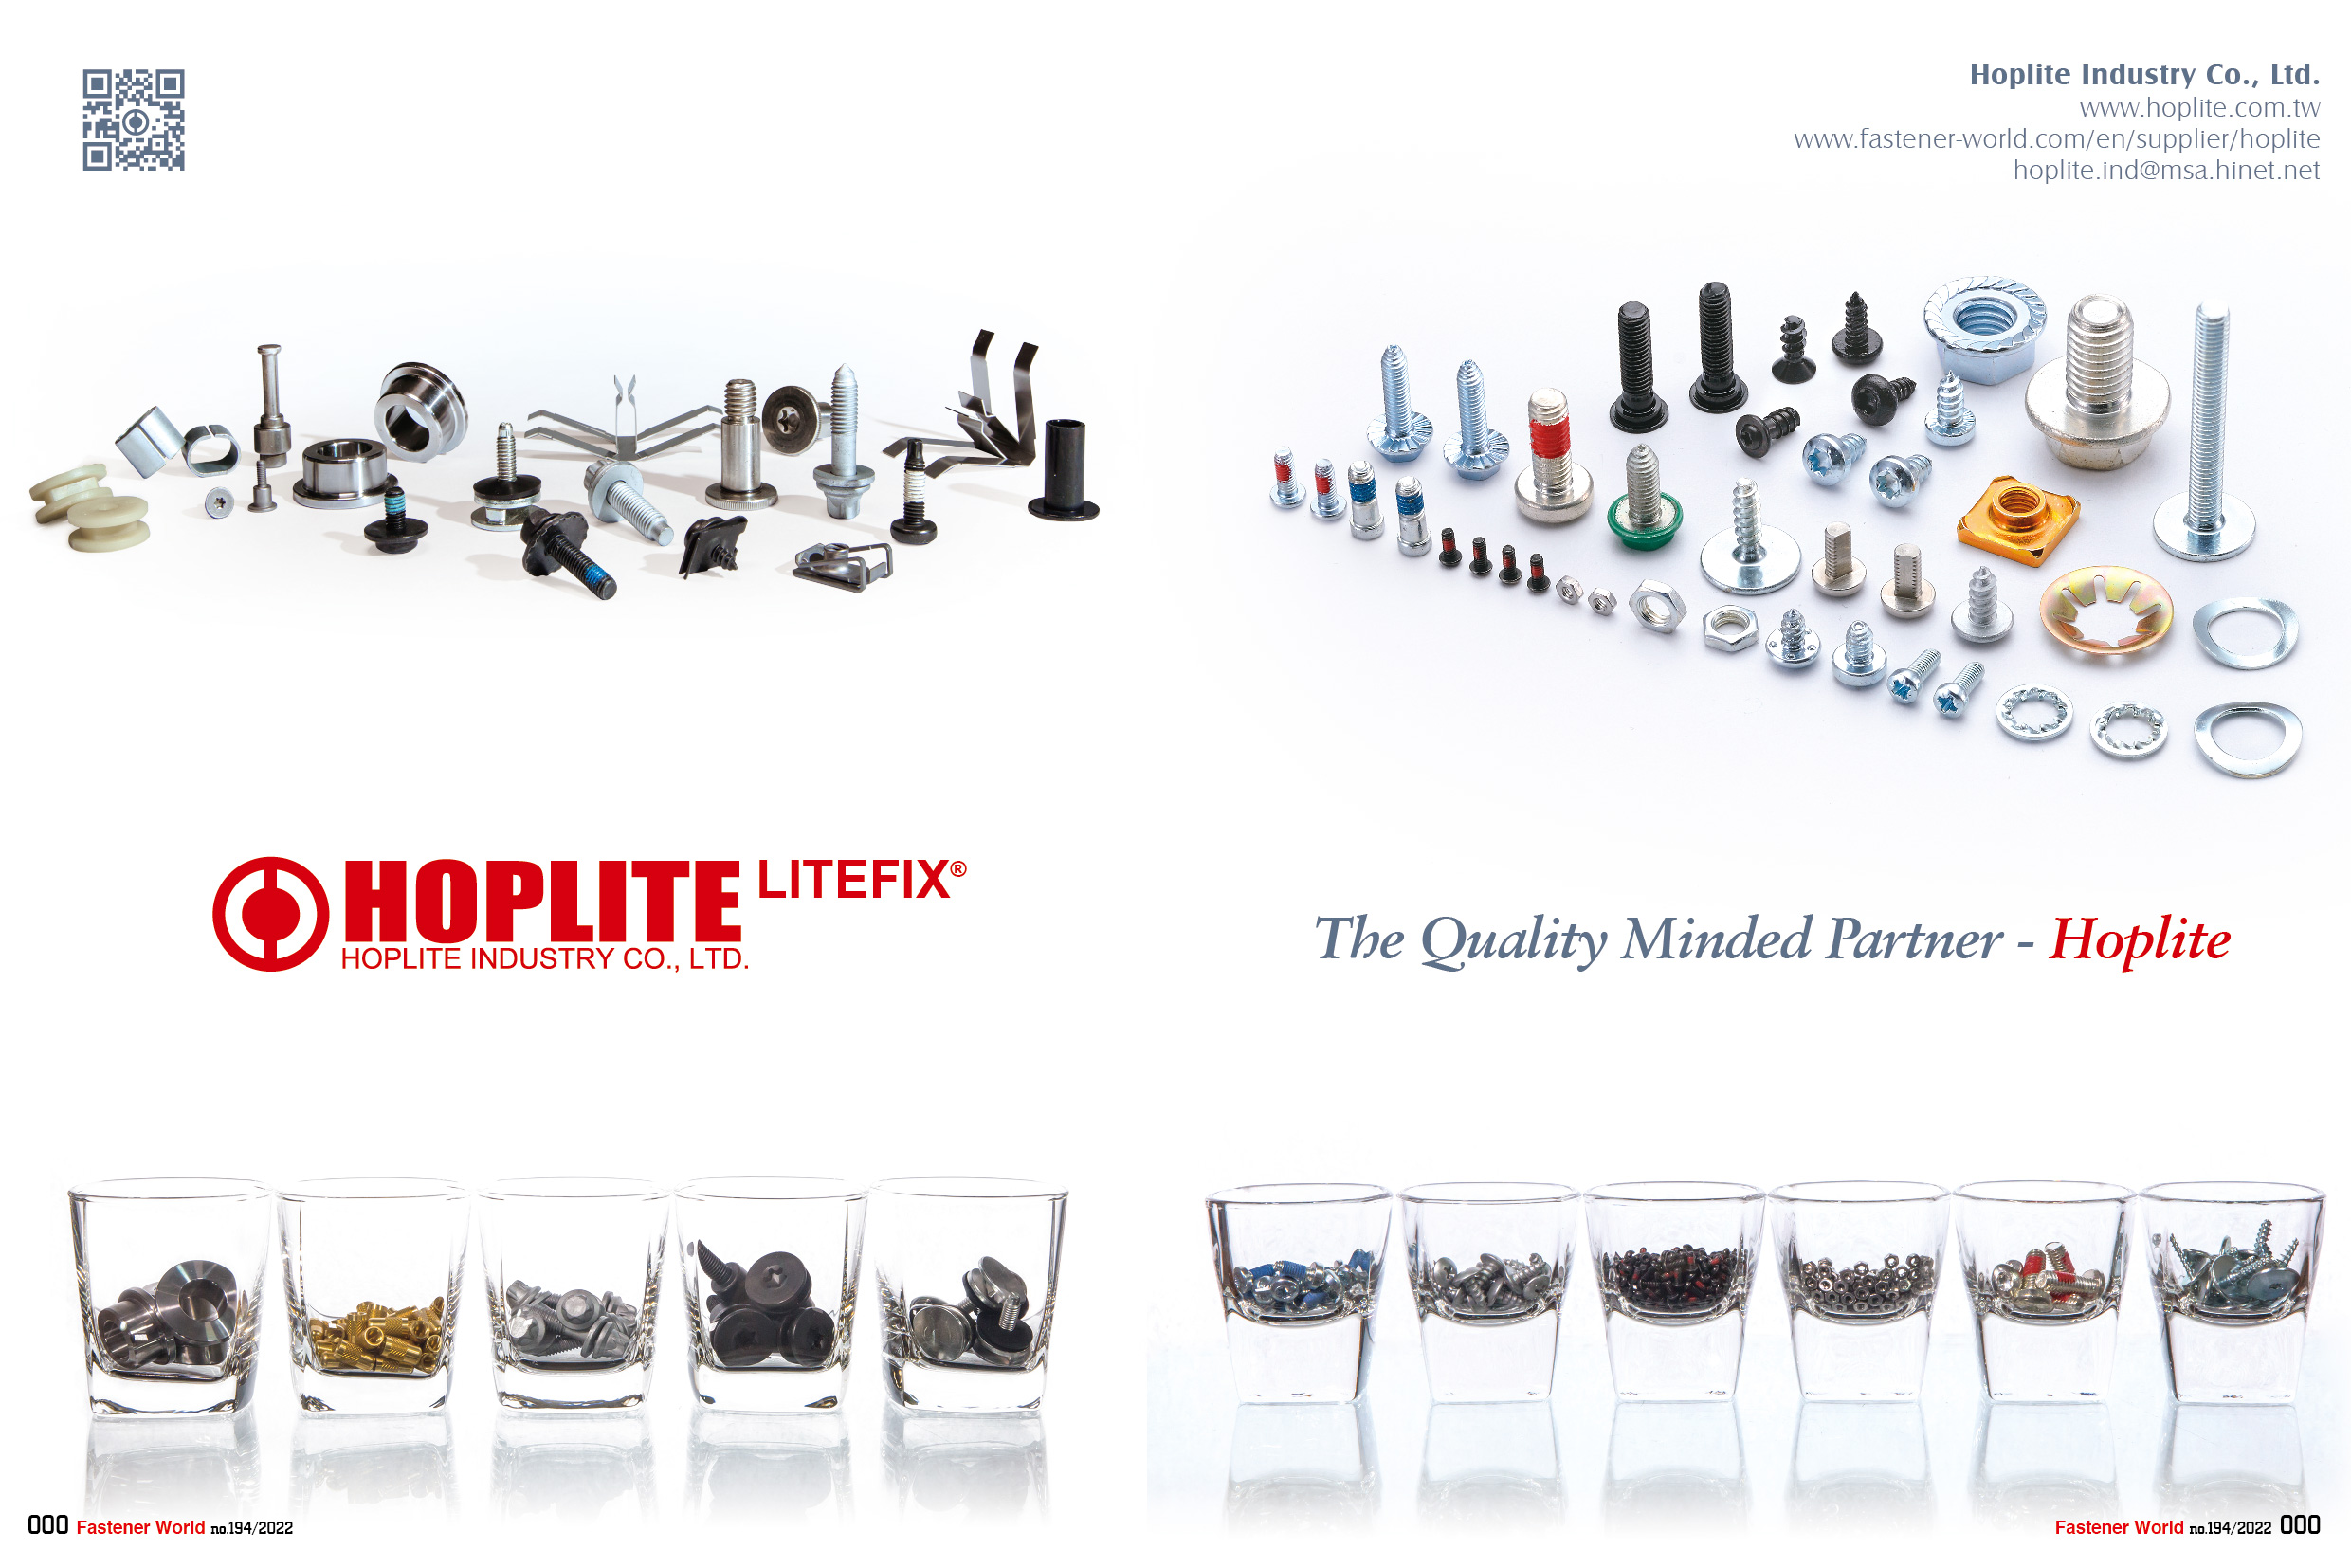 HOPLITE INDUSTRY CO., LTD , Building Indoor / Outdoor, Electronic Nuts / Screws and Bolt / Special, Automotive Screw and Bolt / SEMS / Nut and Bushing / Clip, General Forniture / Packing / Tooling